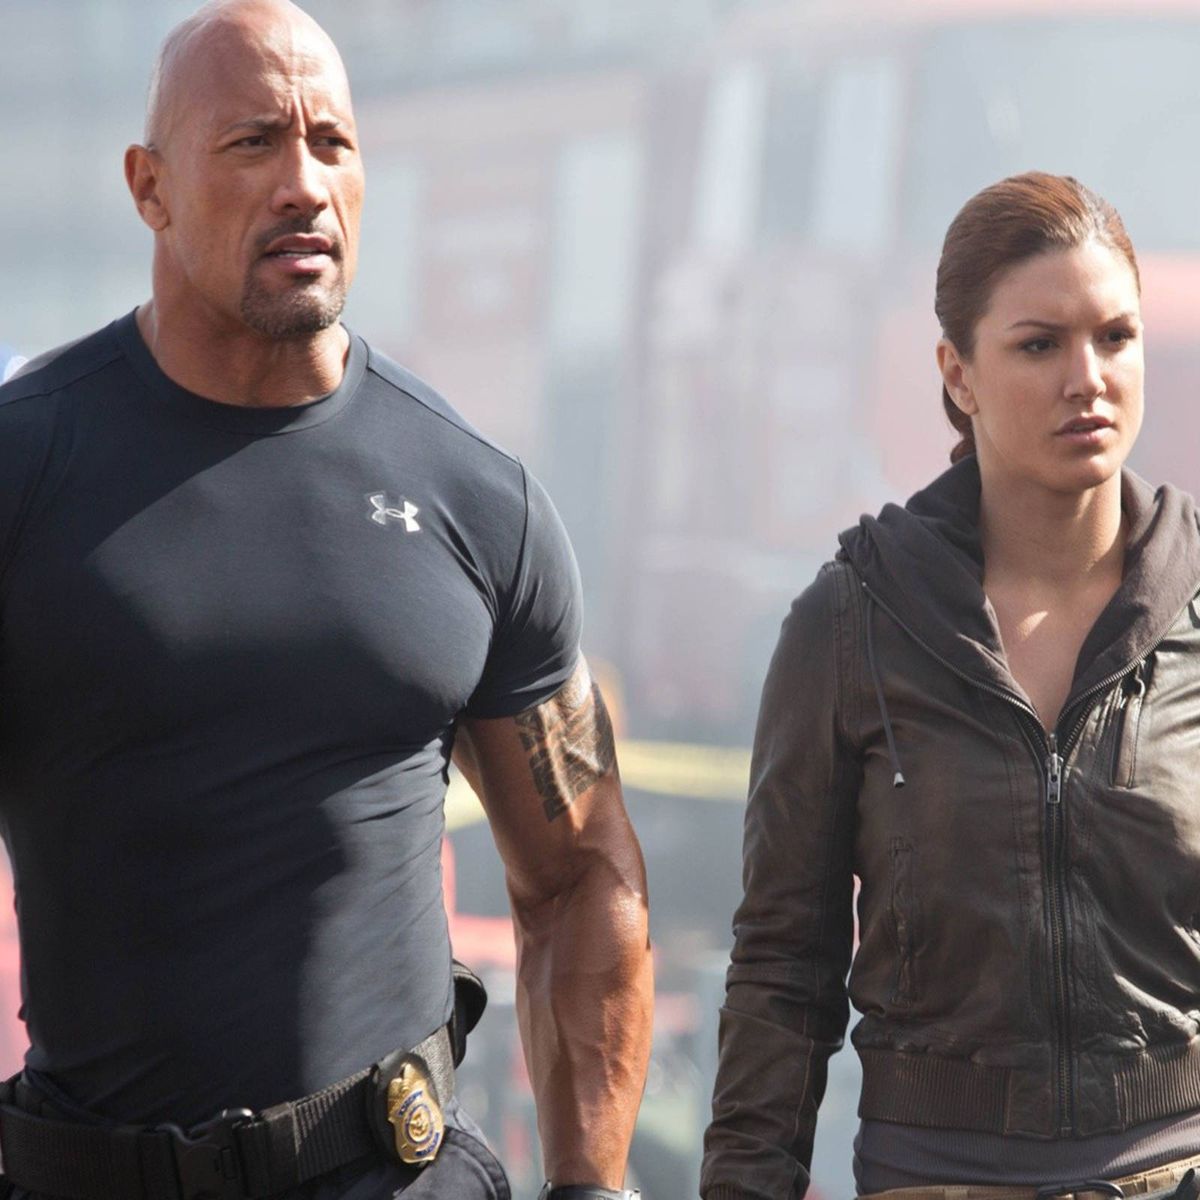 The Rock Will Star In A New Standalone Fast & Furious Movie